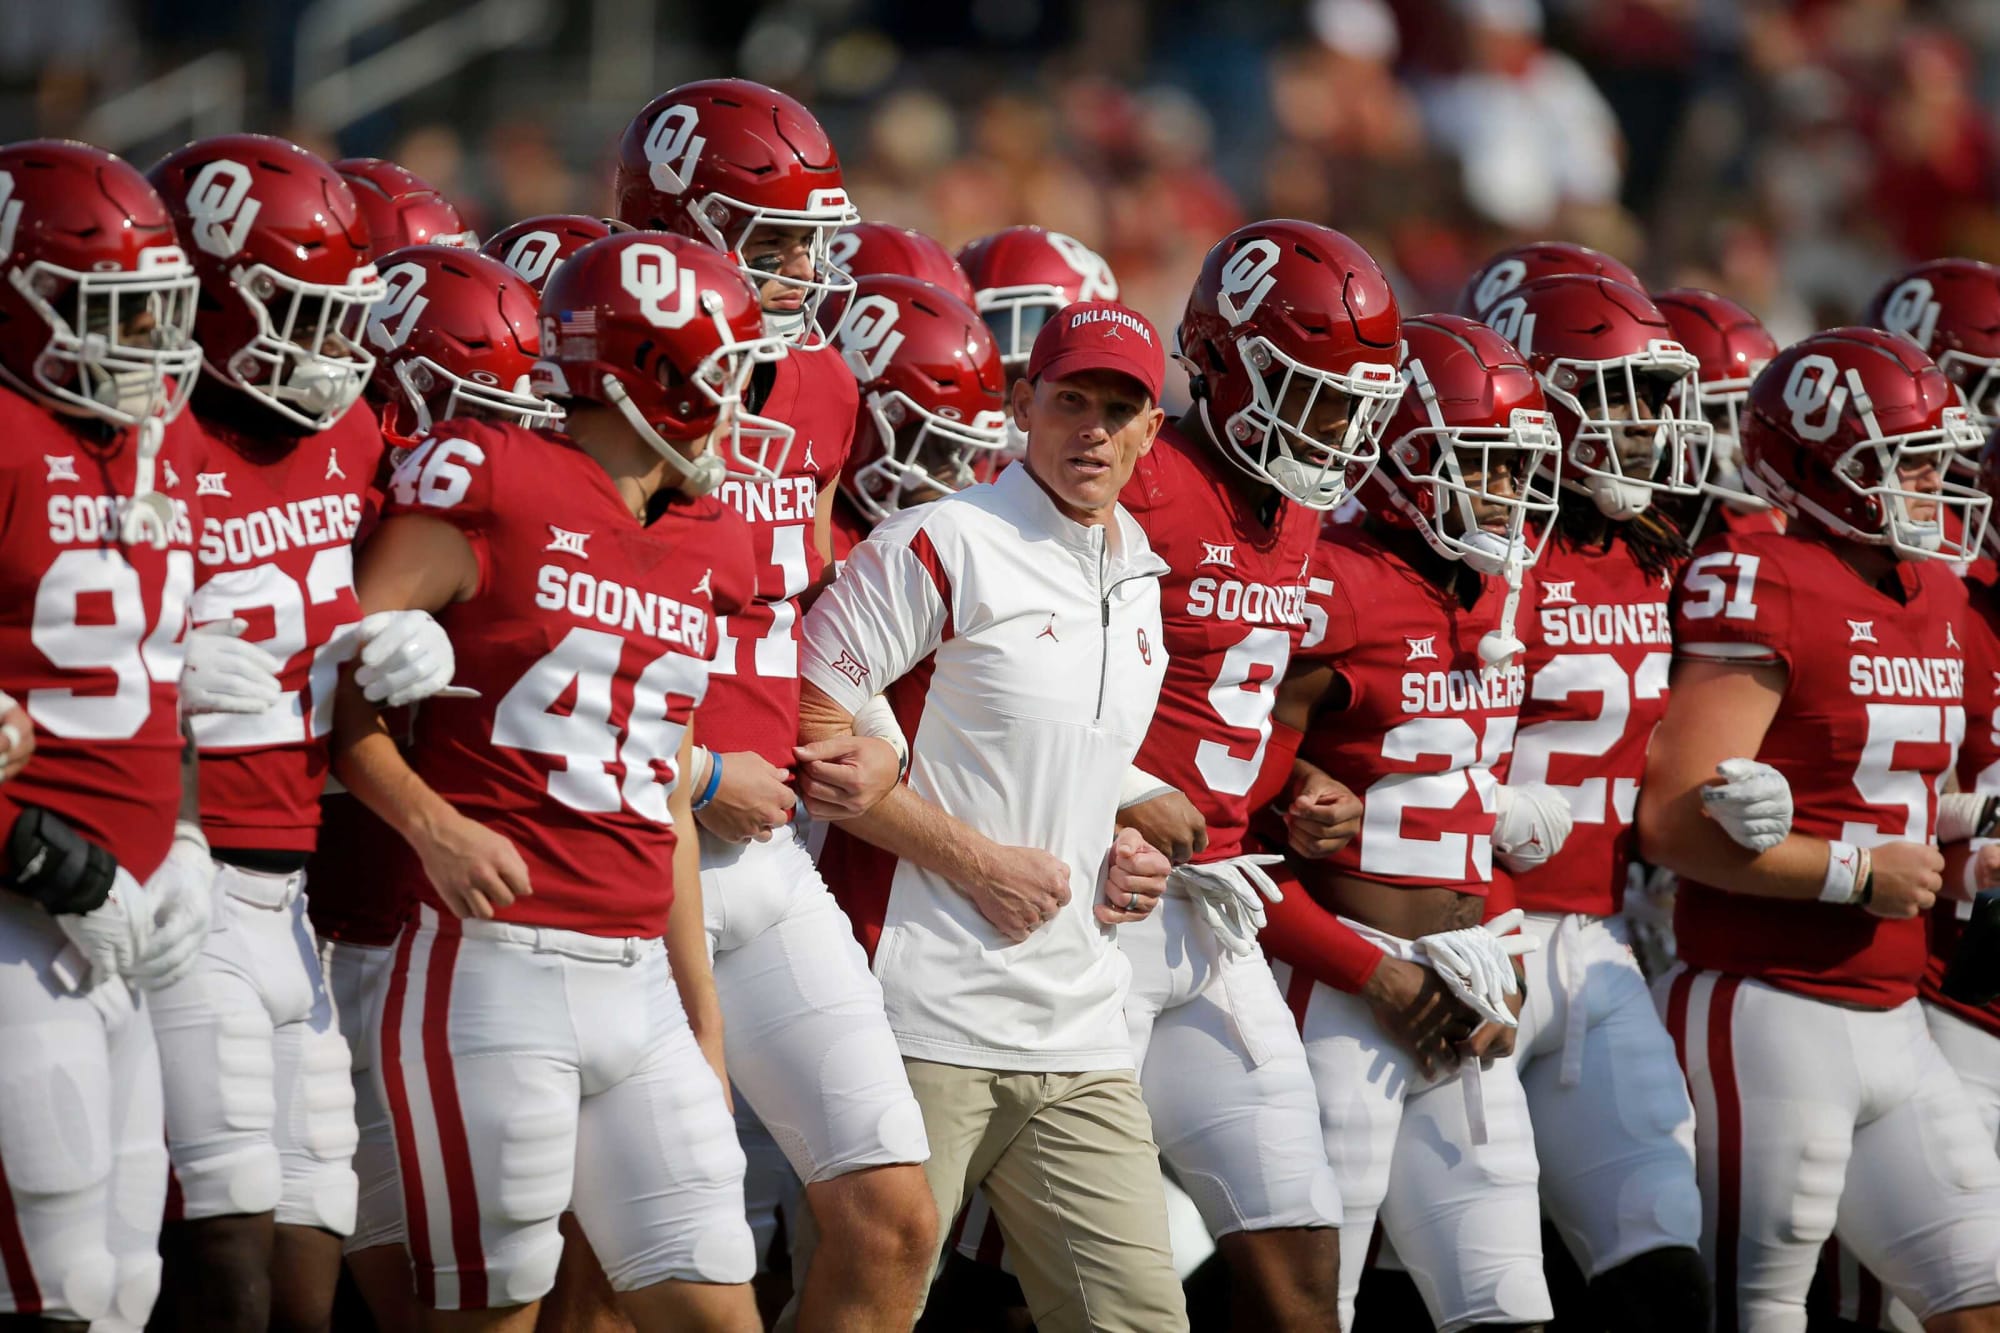 Oklahoma football: This Sooner team has different vibe, purpose and personnel